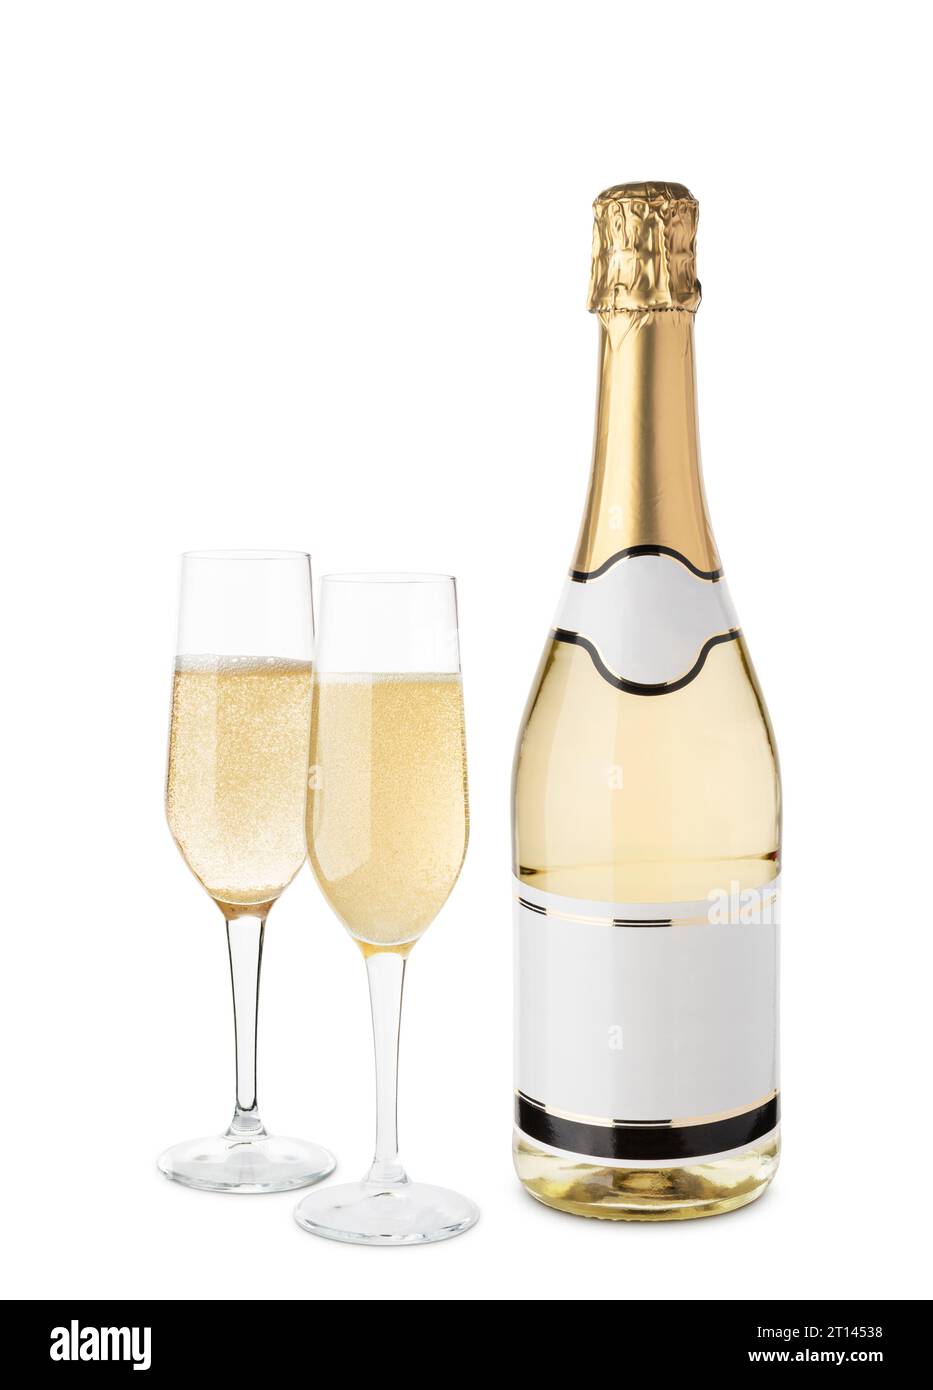 Champagne bottle with blank label and glasses, isolated on white background. Stock Photo